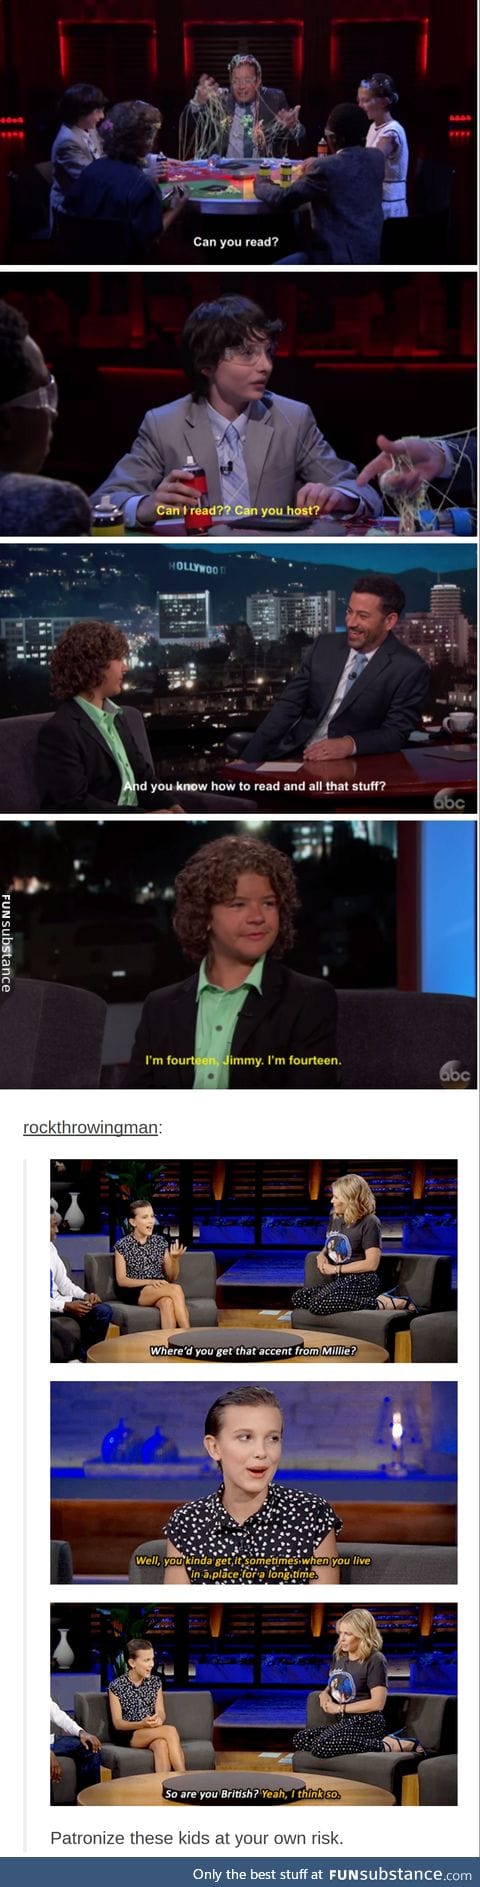 the "stranger things" kids are savage